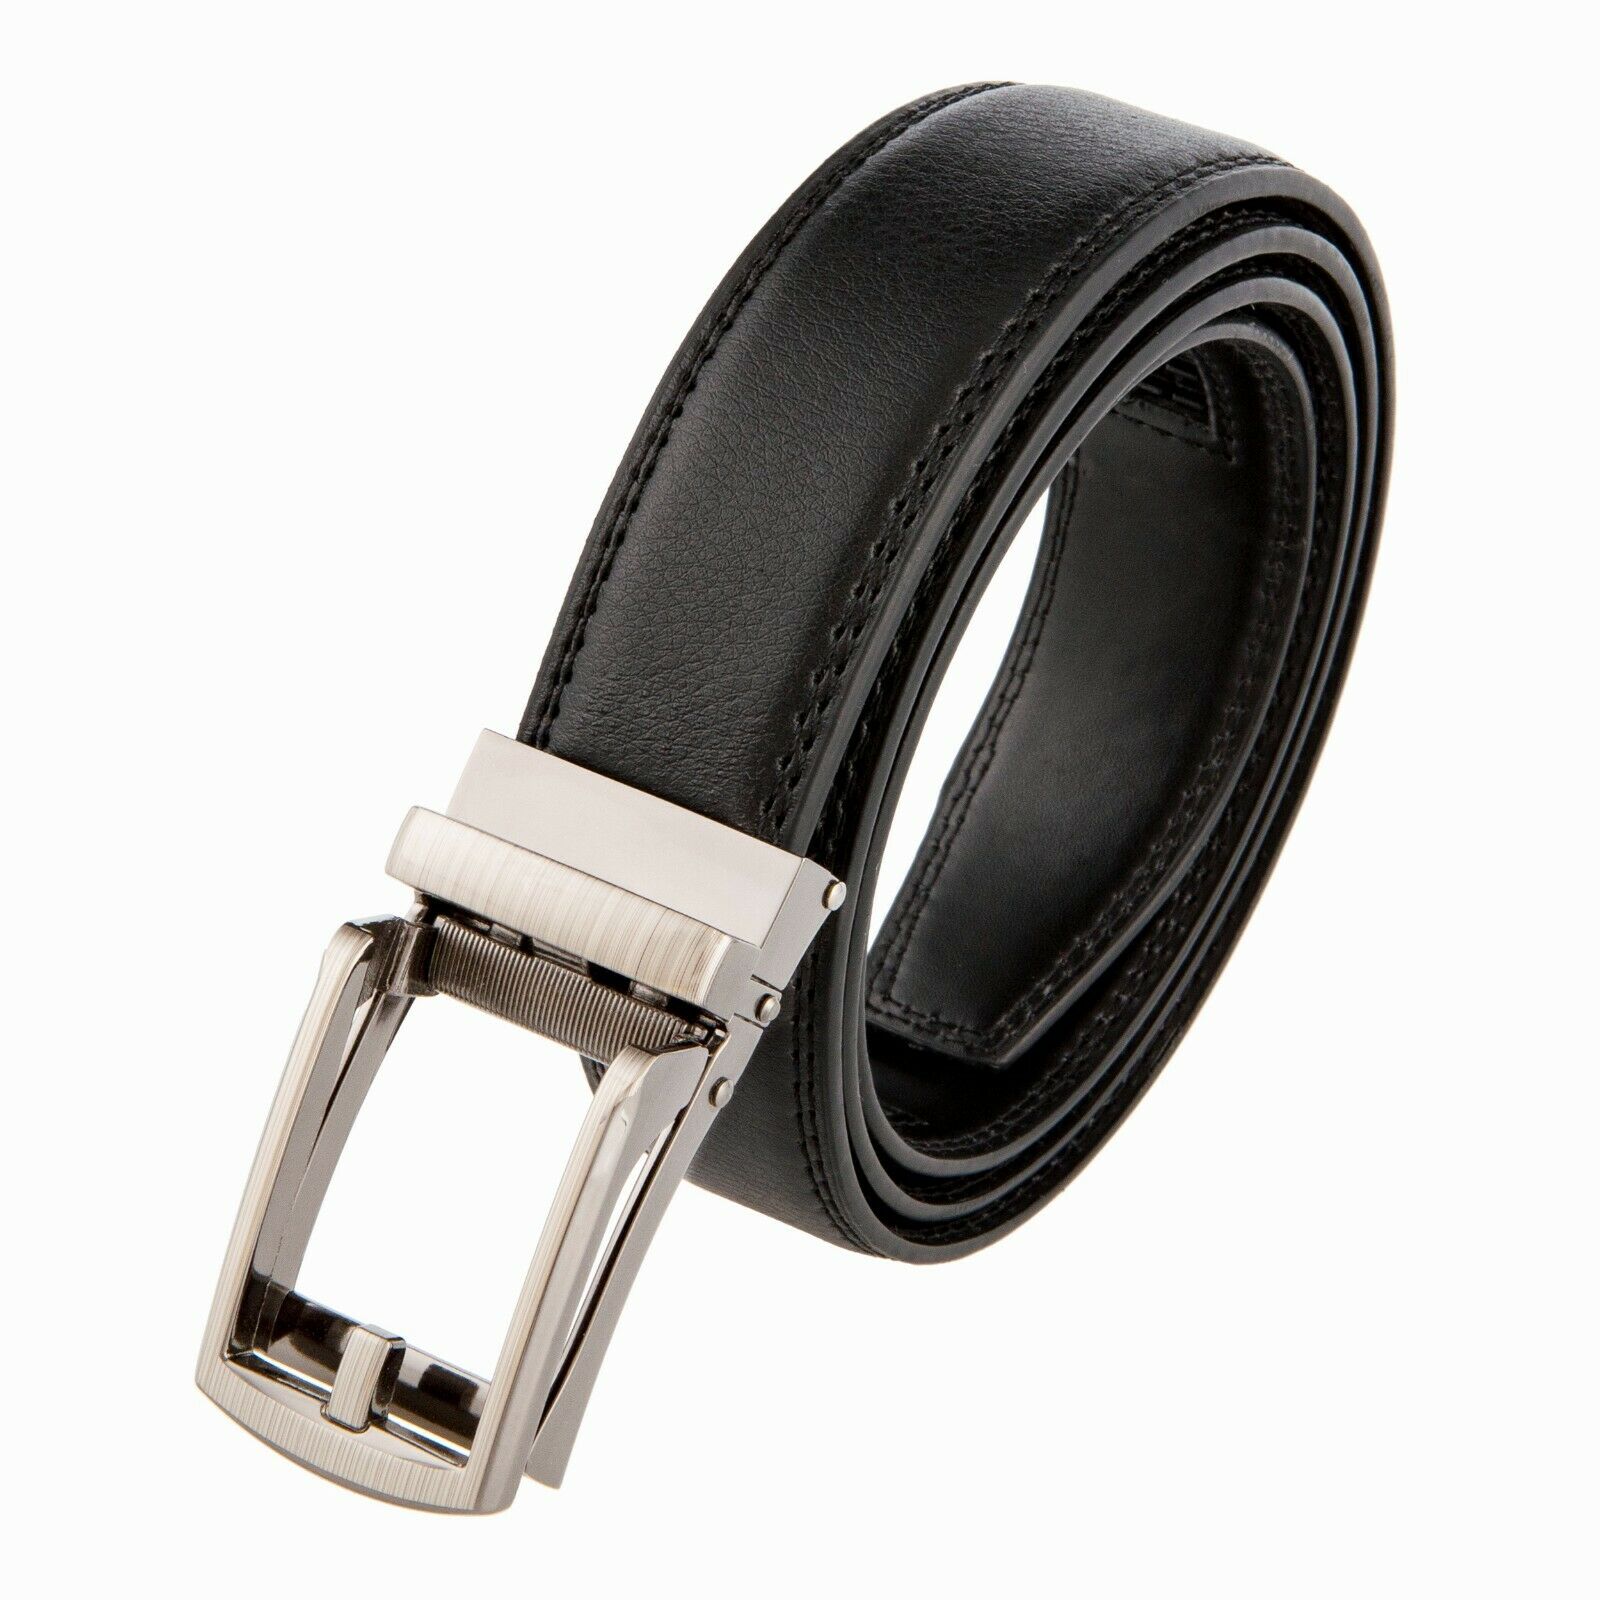 Comfort Click Belt Leather Automatic Adjustable Men Gift As Seen On Tv Us Seller